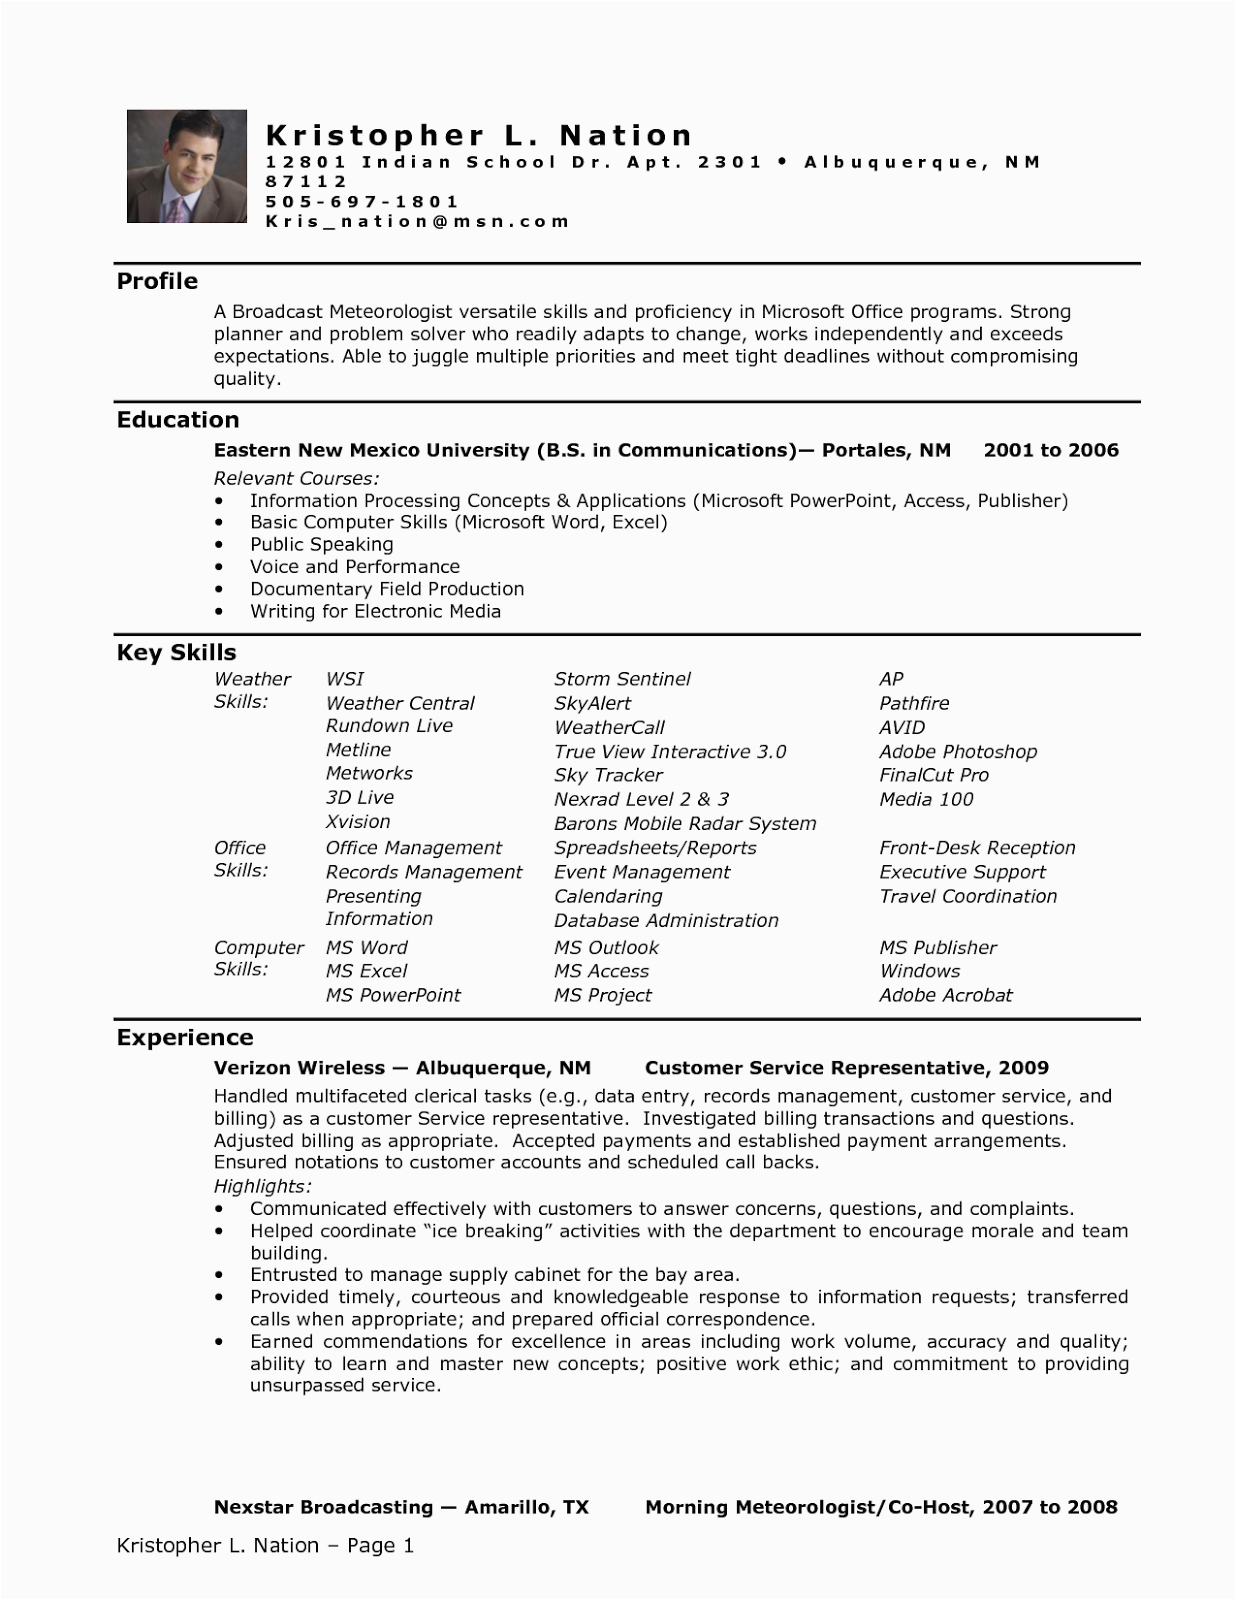 Sample Resume Templates for Administrative assistant Administrative assistant Sample Resume